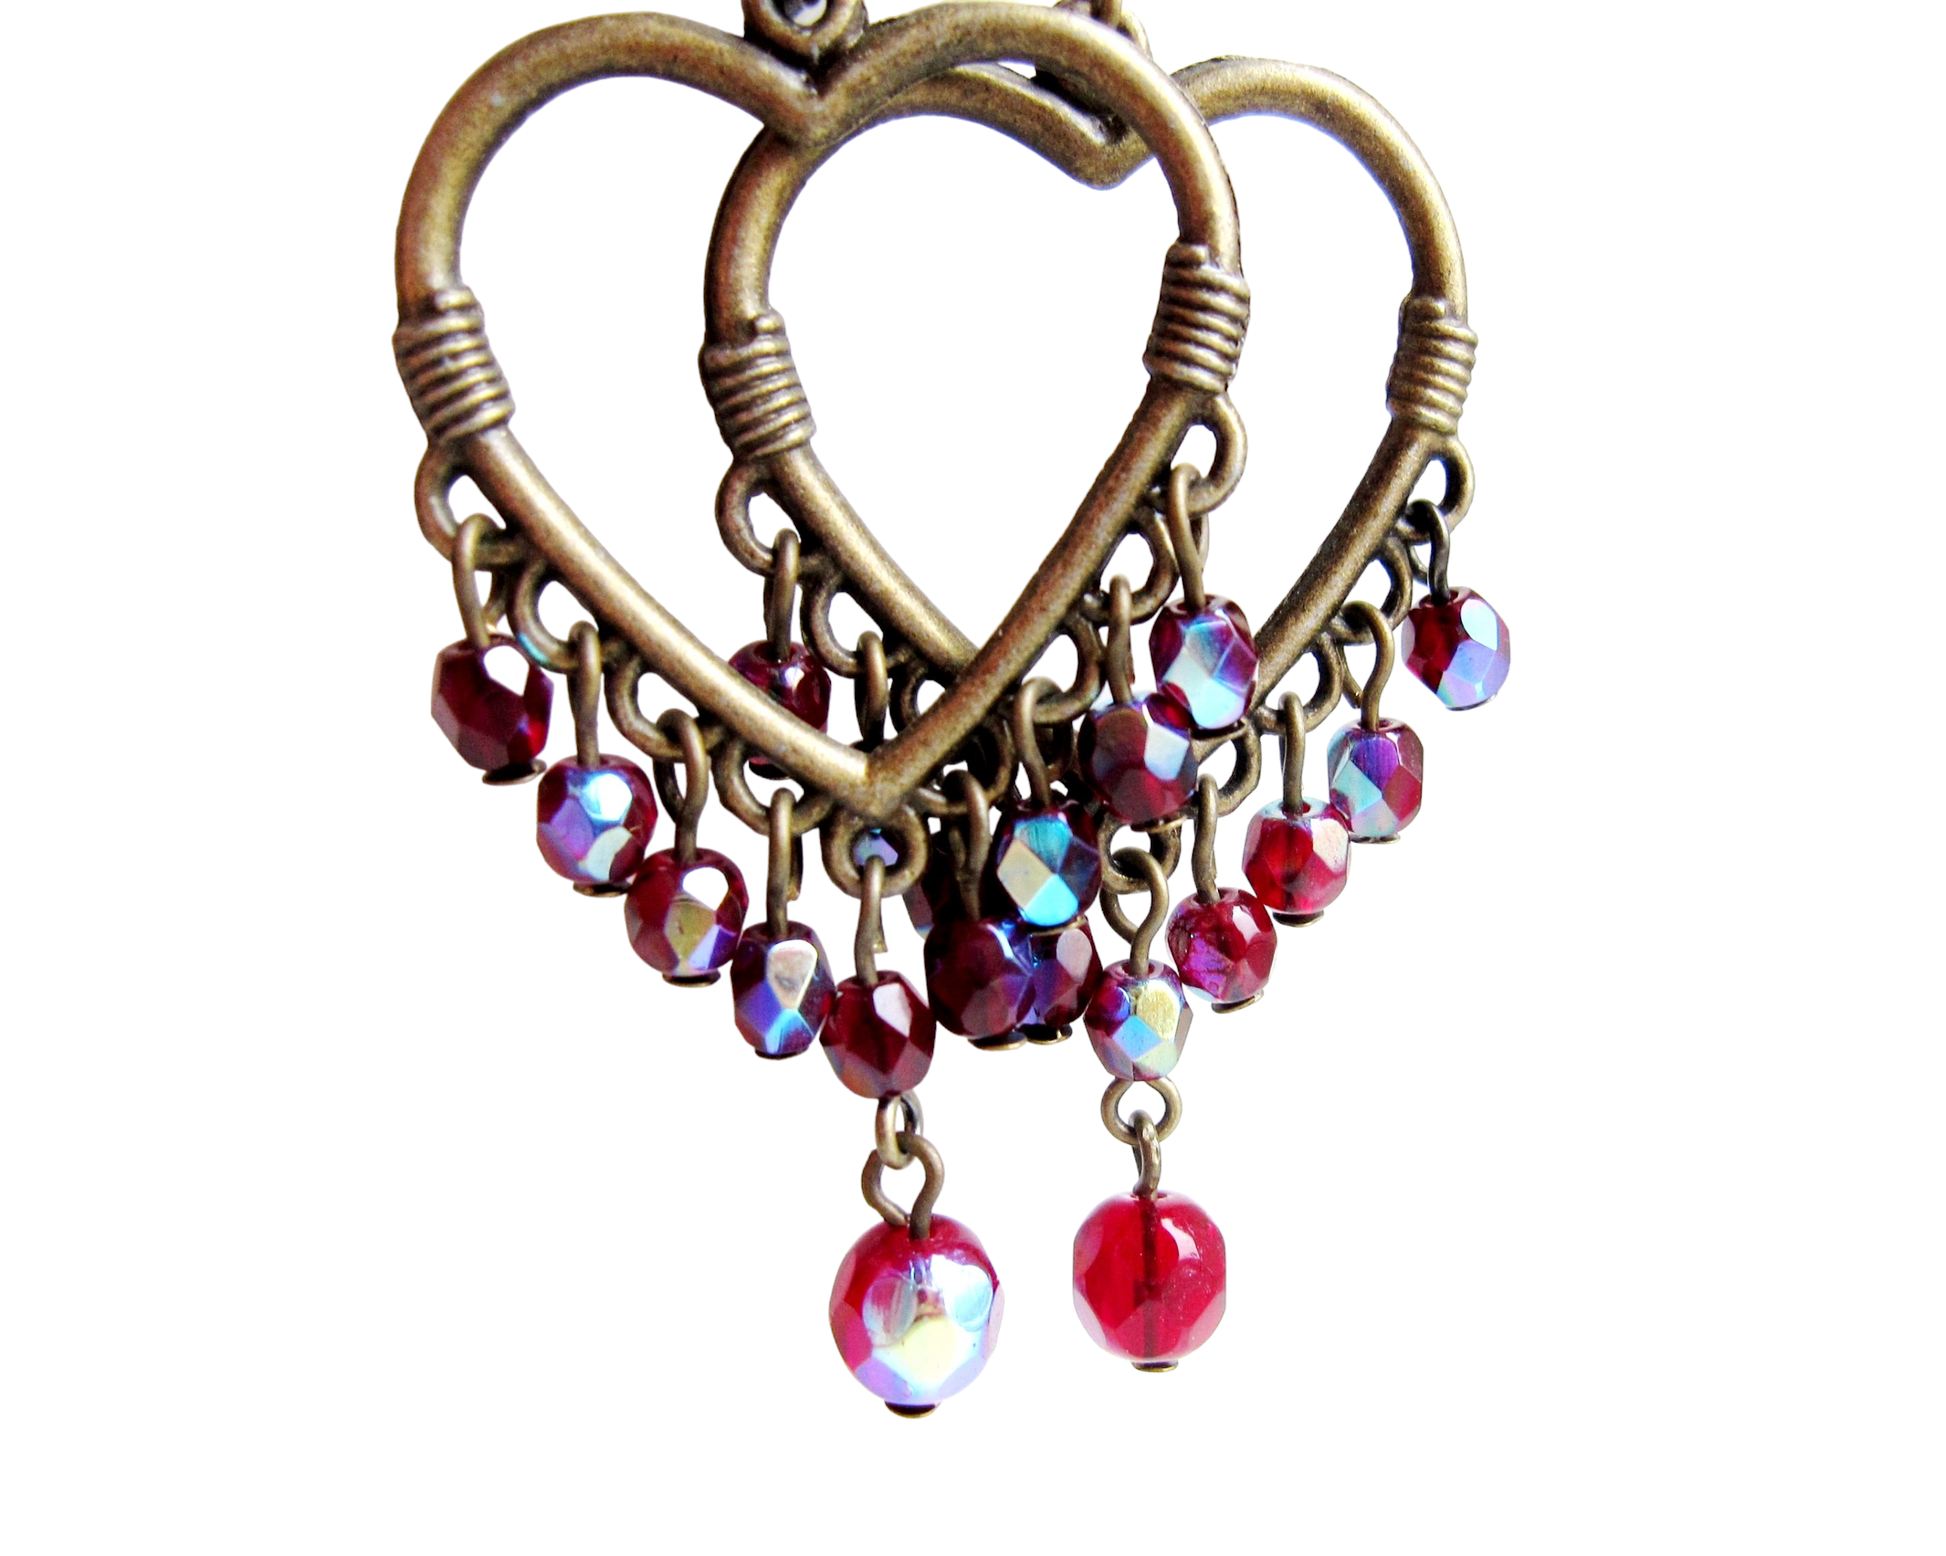 Large, Long Heart Hoop Earrings with Sparkly Deep Red Dangly Beads, Red AB with Antique Brass